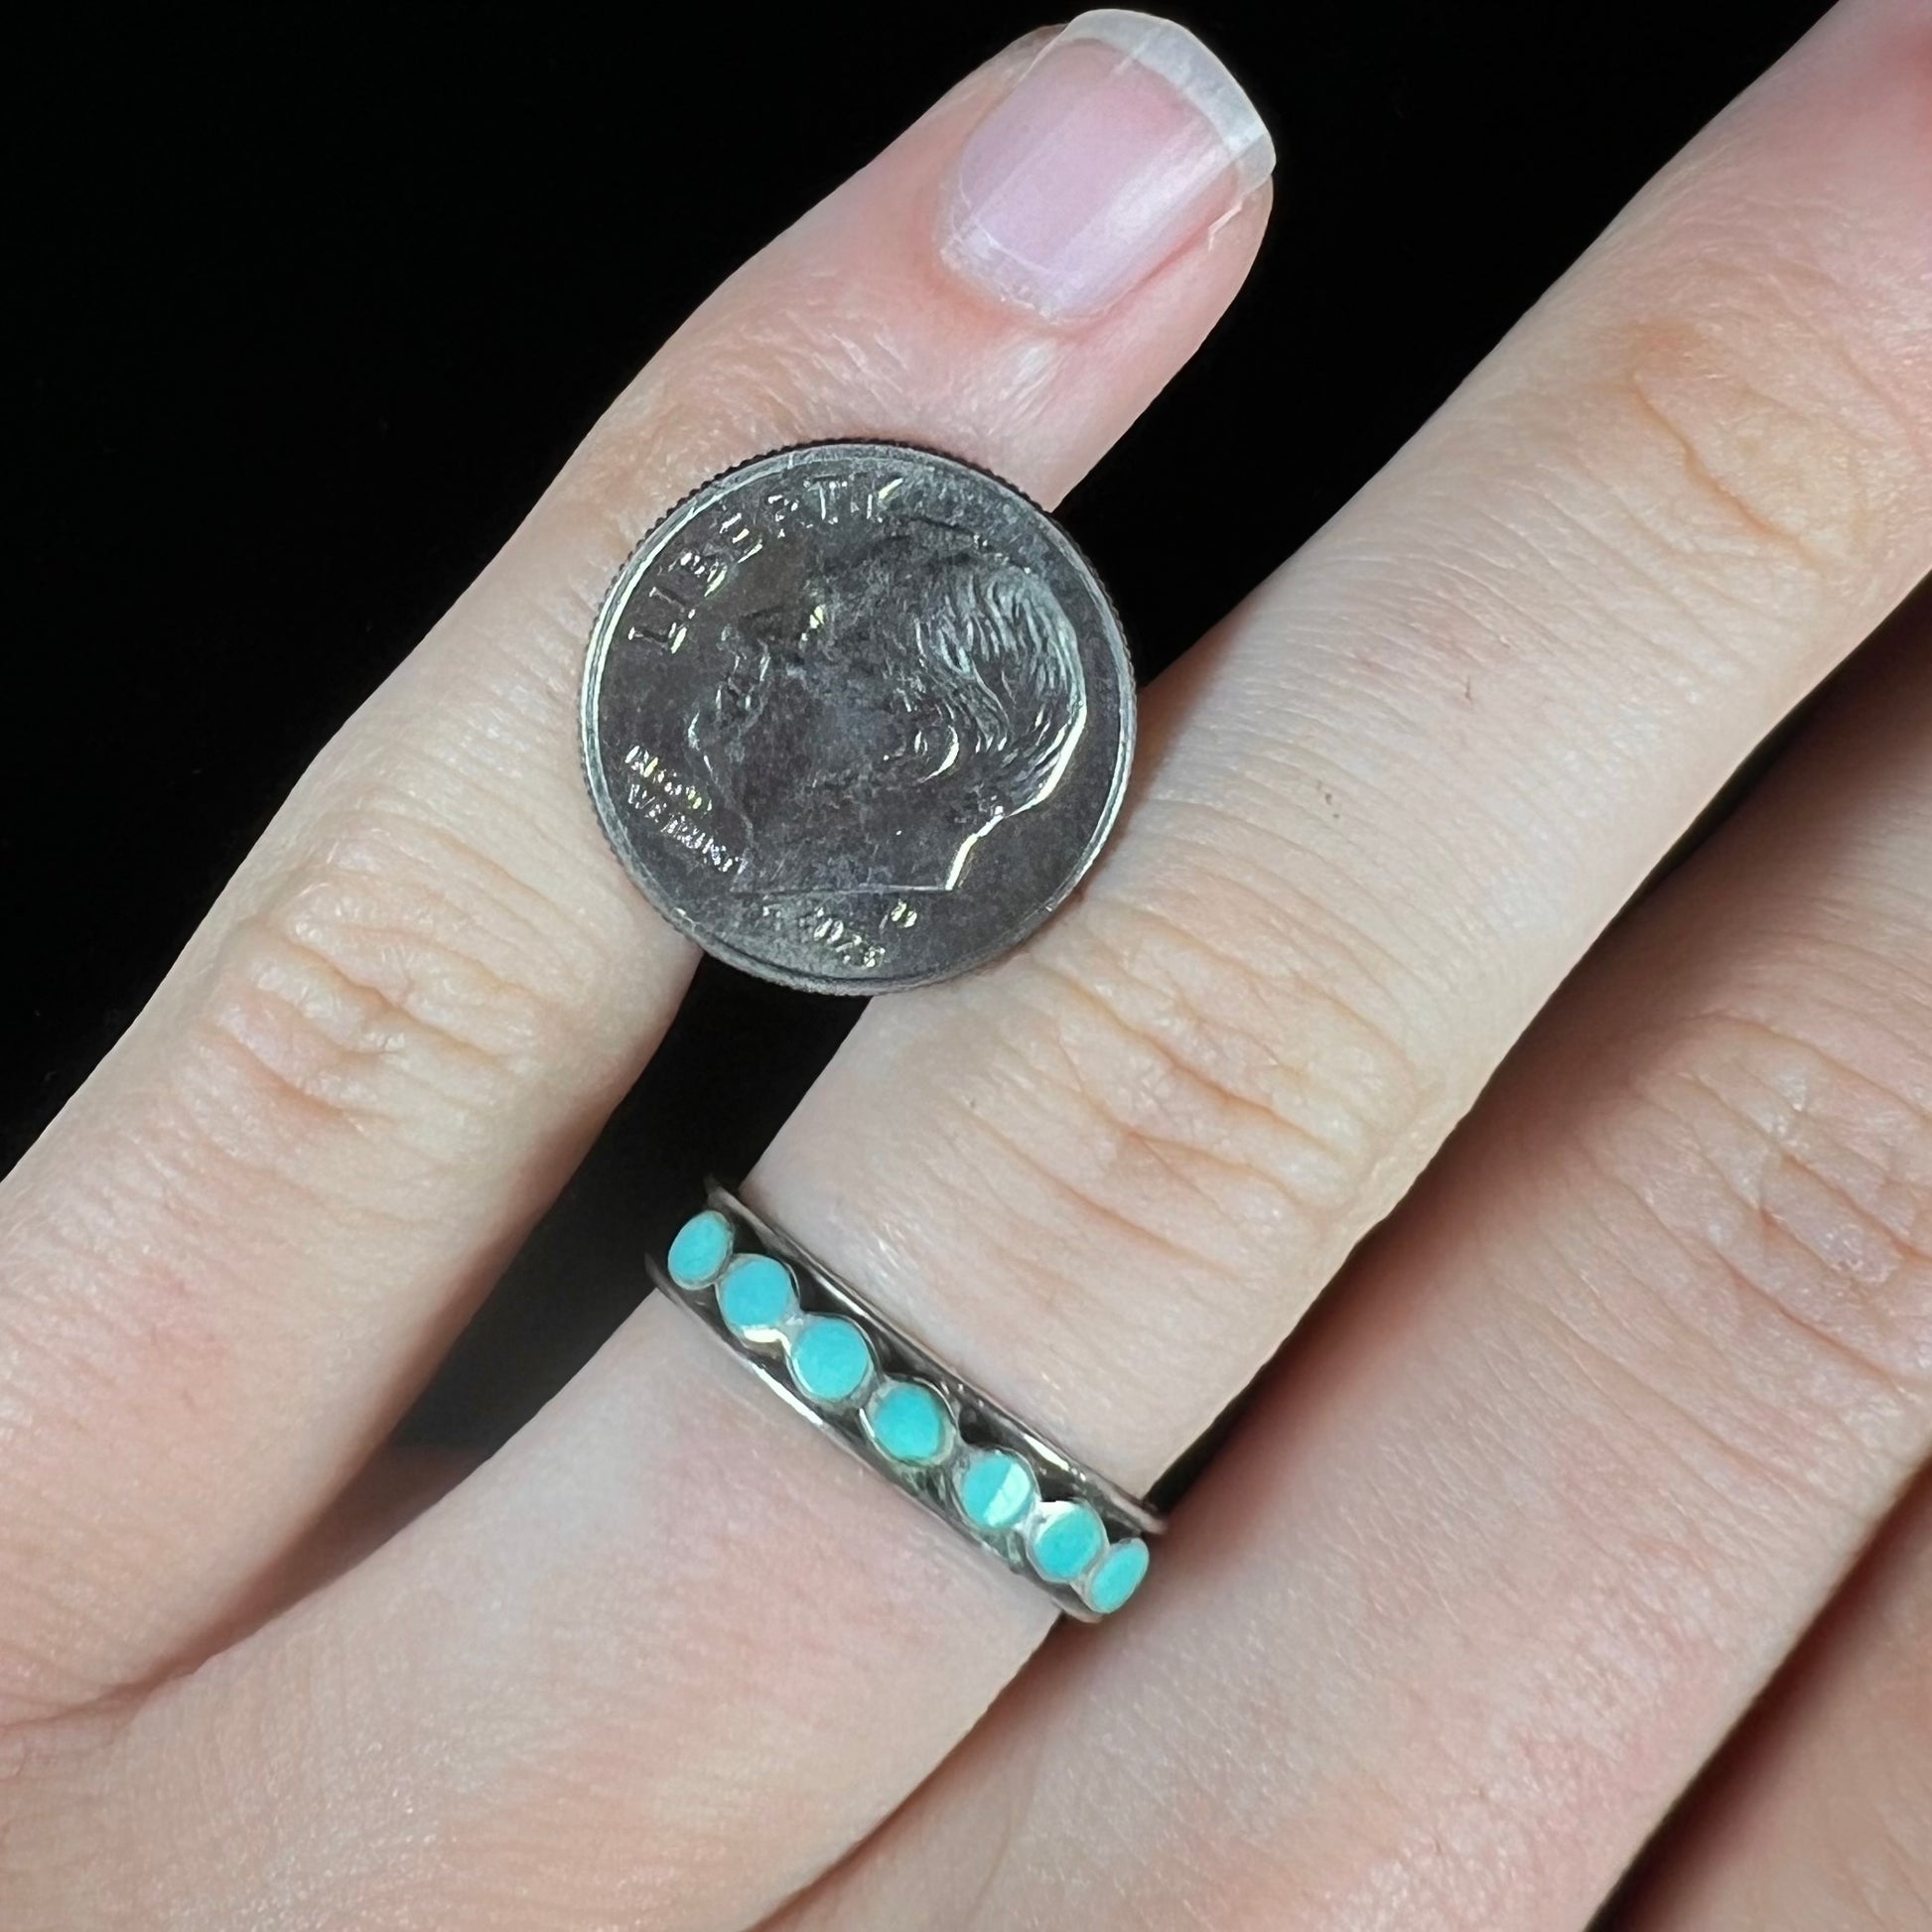 A ladies' sterling silver Hopi style band set with round cut Sleeping Beauty turquoise stones.